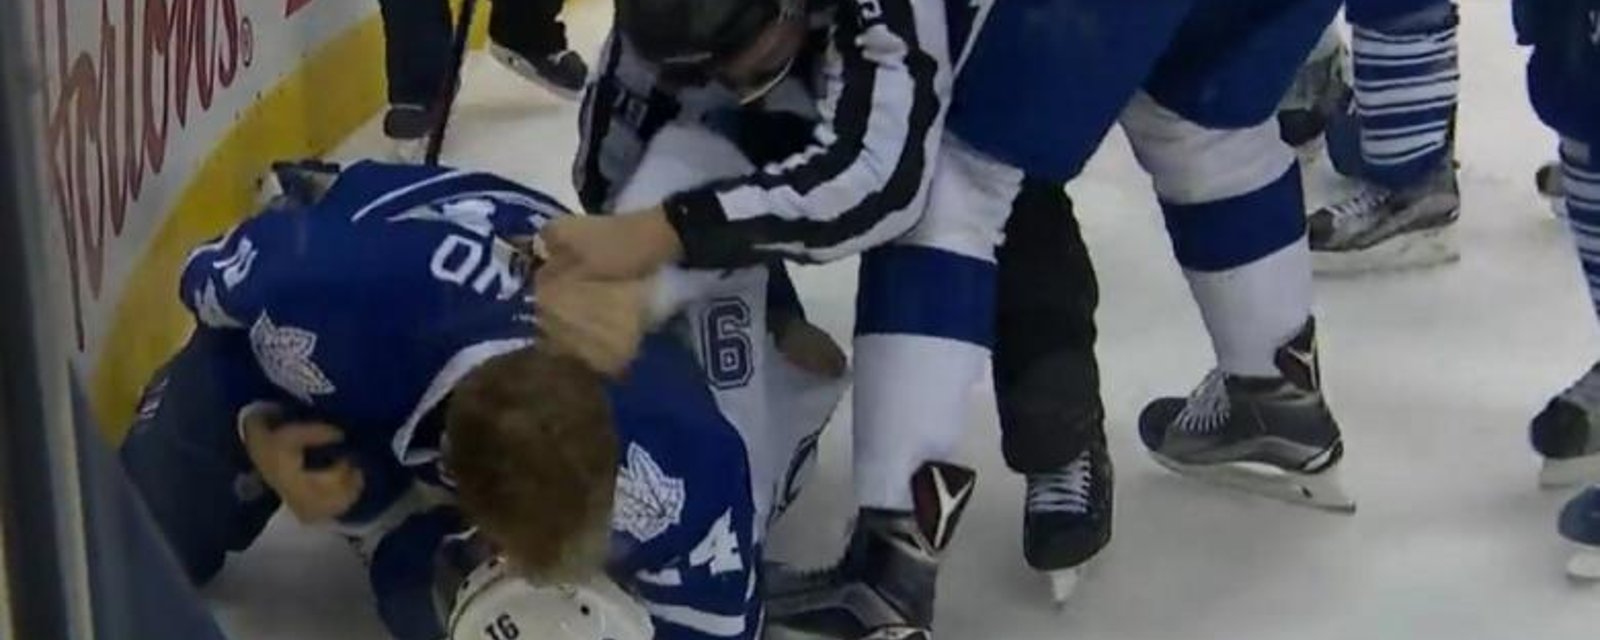 Holland not happy with Stamkos hit, attempts to maul him.